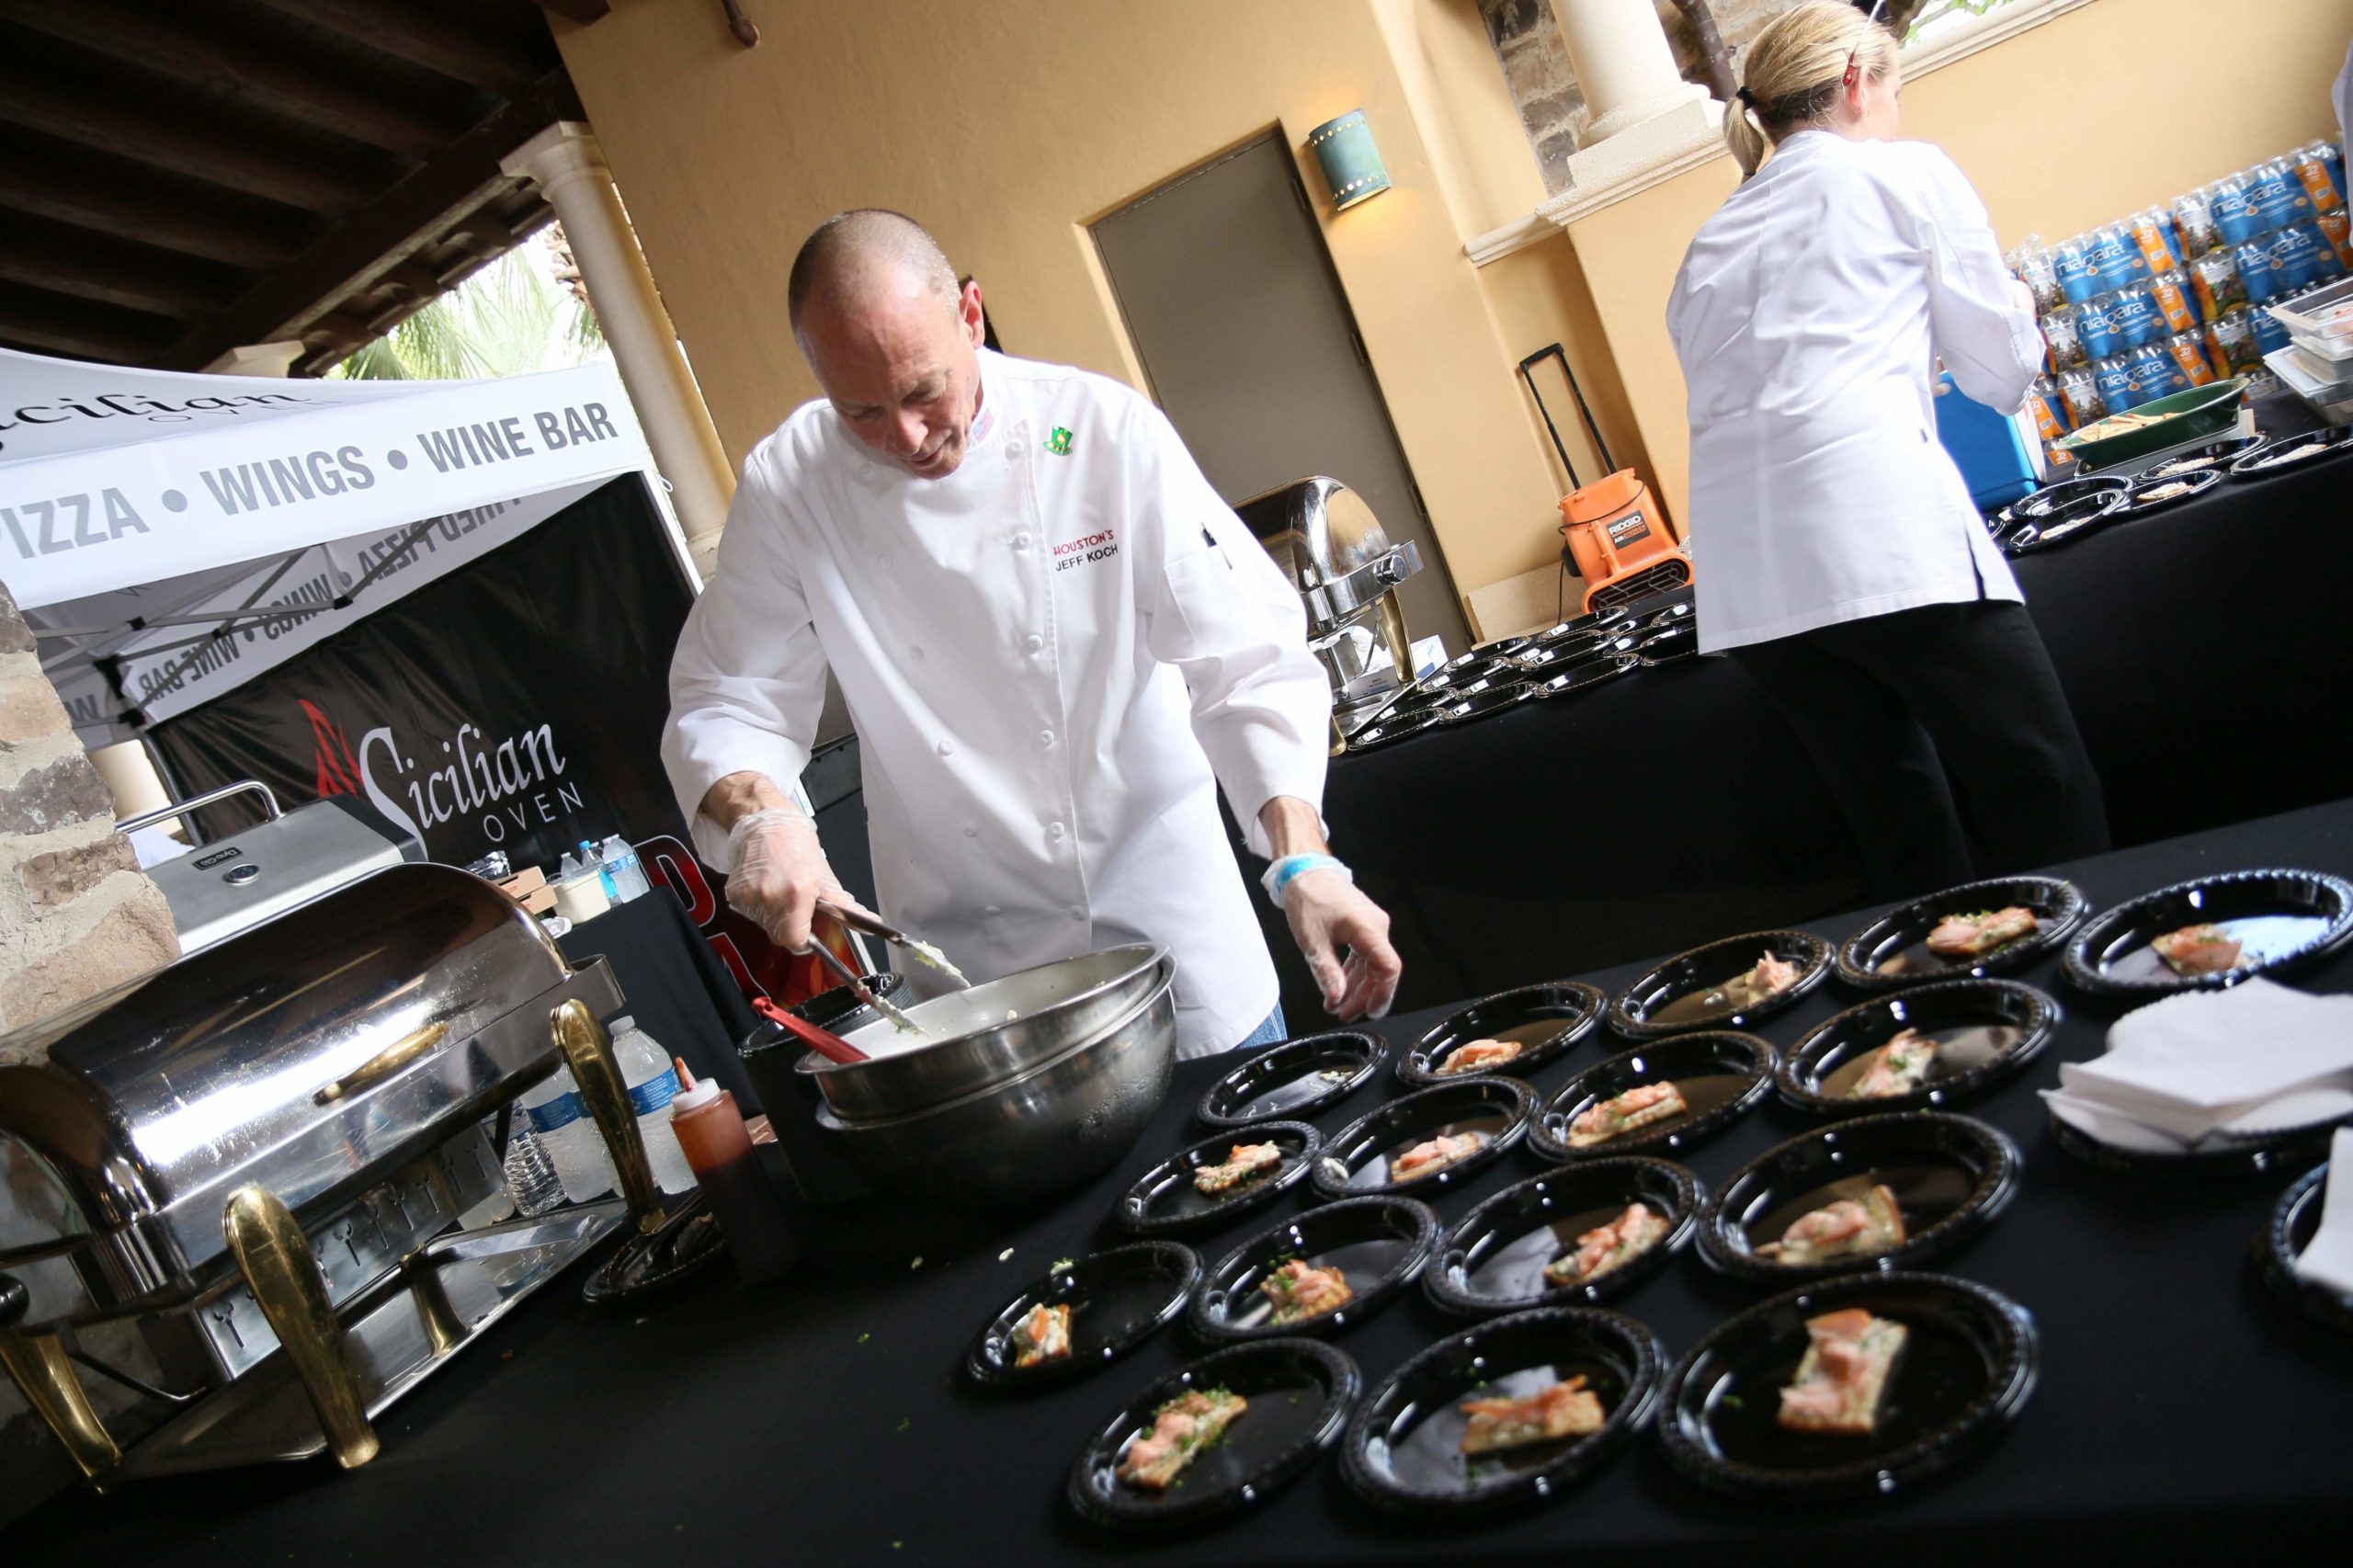 28 Local Restaurants Dish Out Food & Wine Benefiting Parkland Cares 1